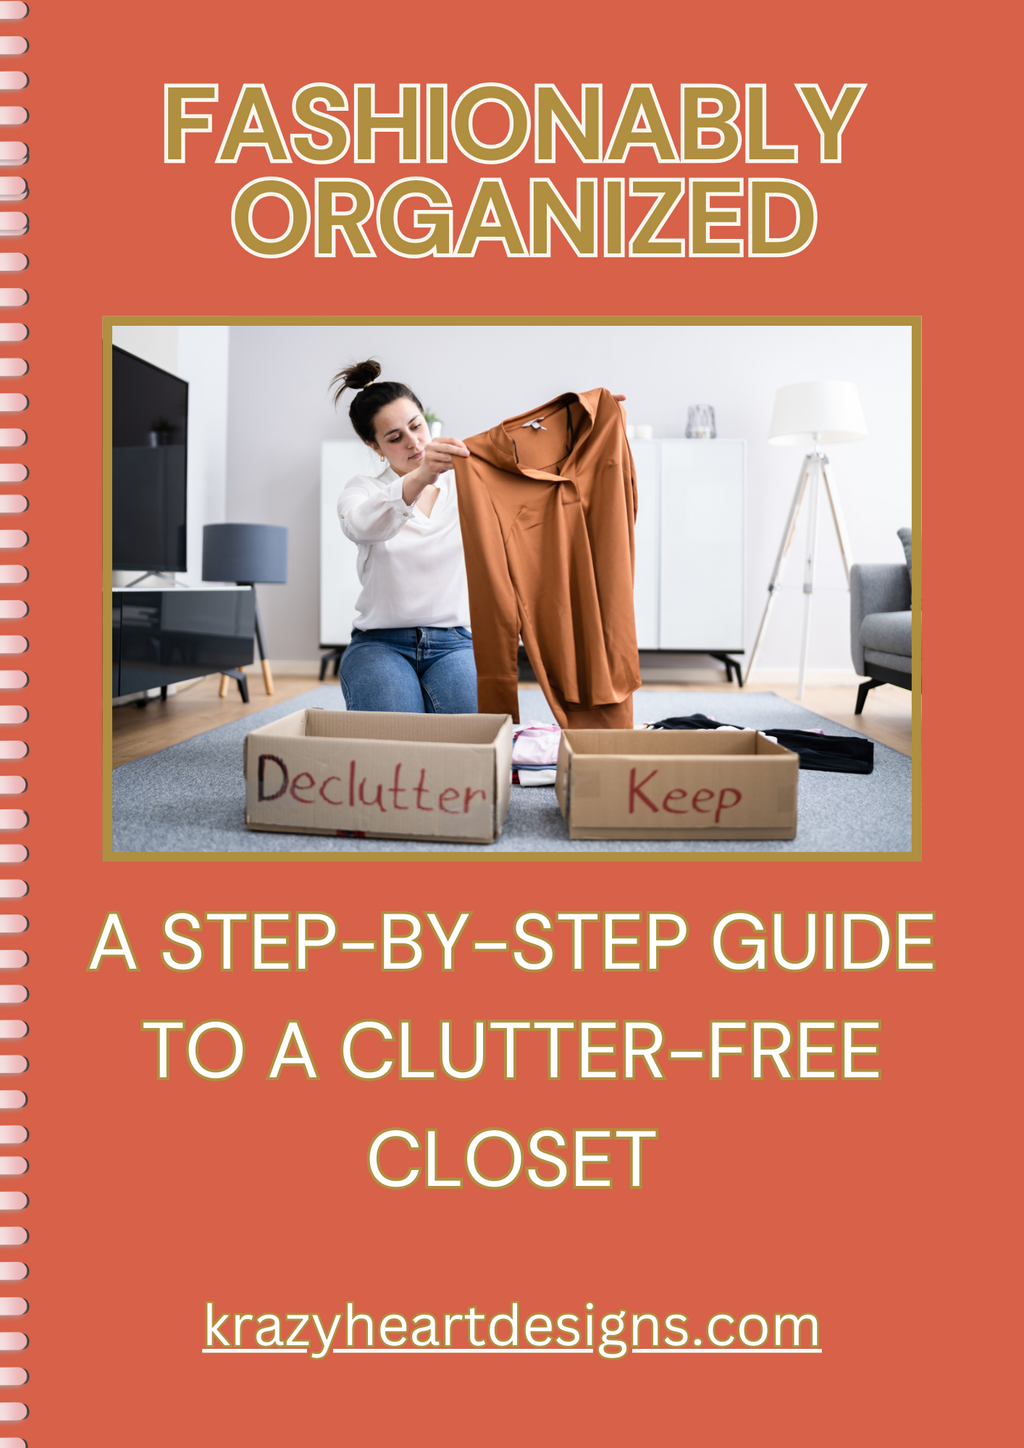 Fashionably Organized: A Step-by-Step Guide to a Clutter-Free Closet E-Book E-Book Krazy Heart Designs Boutique   